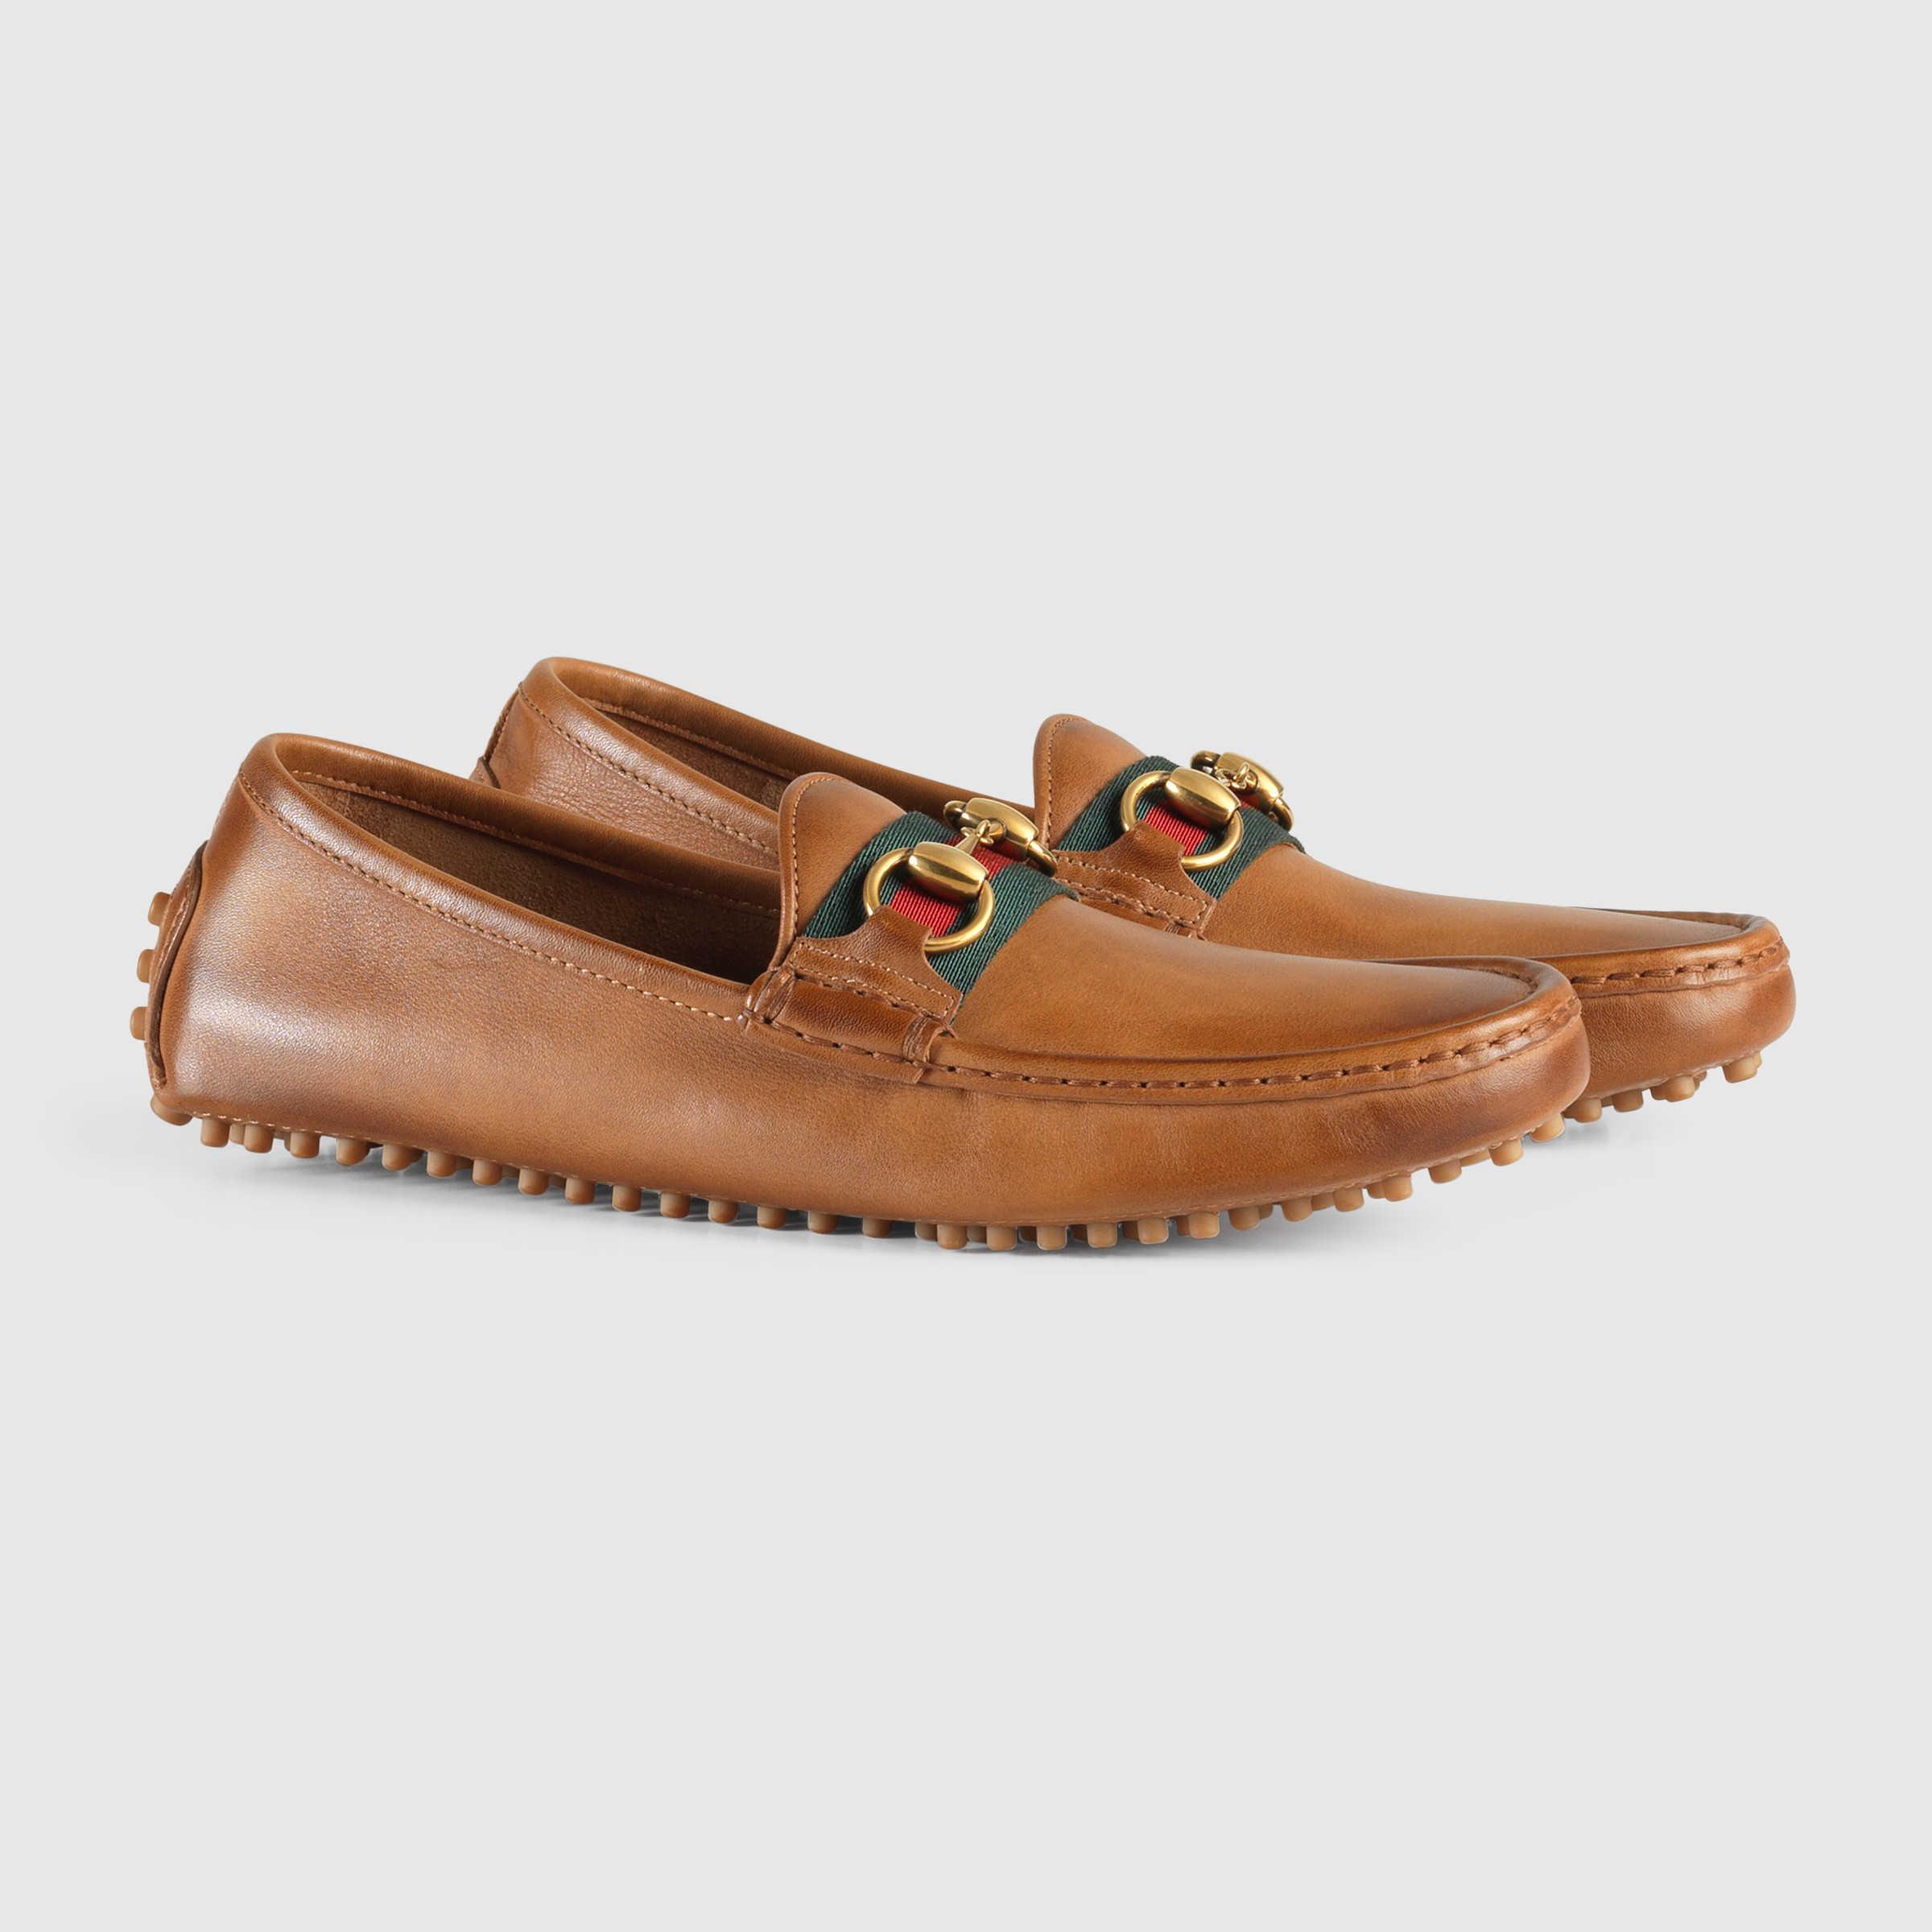 Gucci Horsebit Leather Driver Moccasins in Brown | Lyst